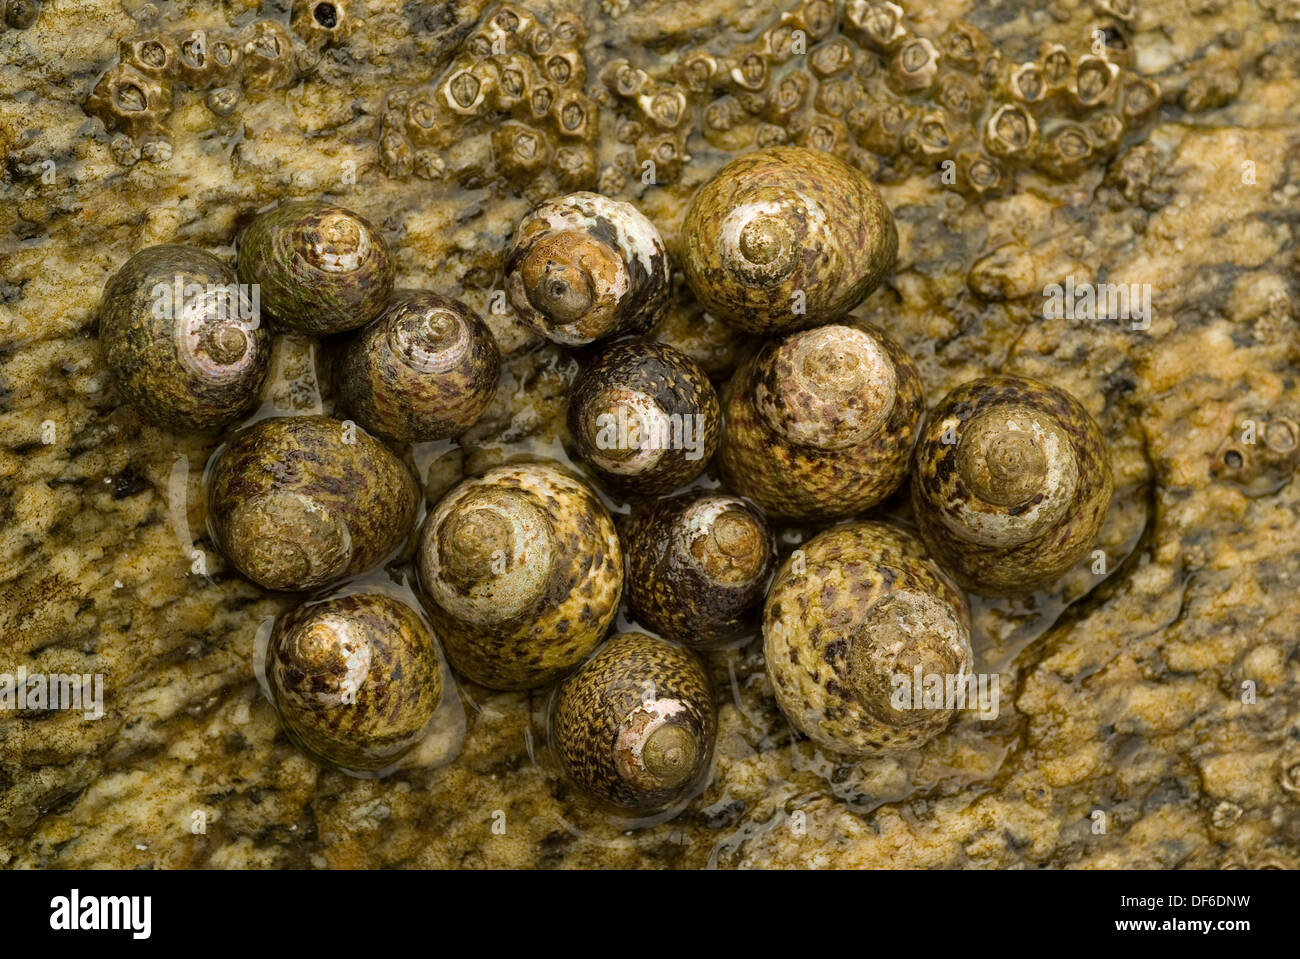 Group of Common Winkles (Littorin littorea) in an intertidal rock pool. Stock Photo